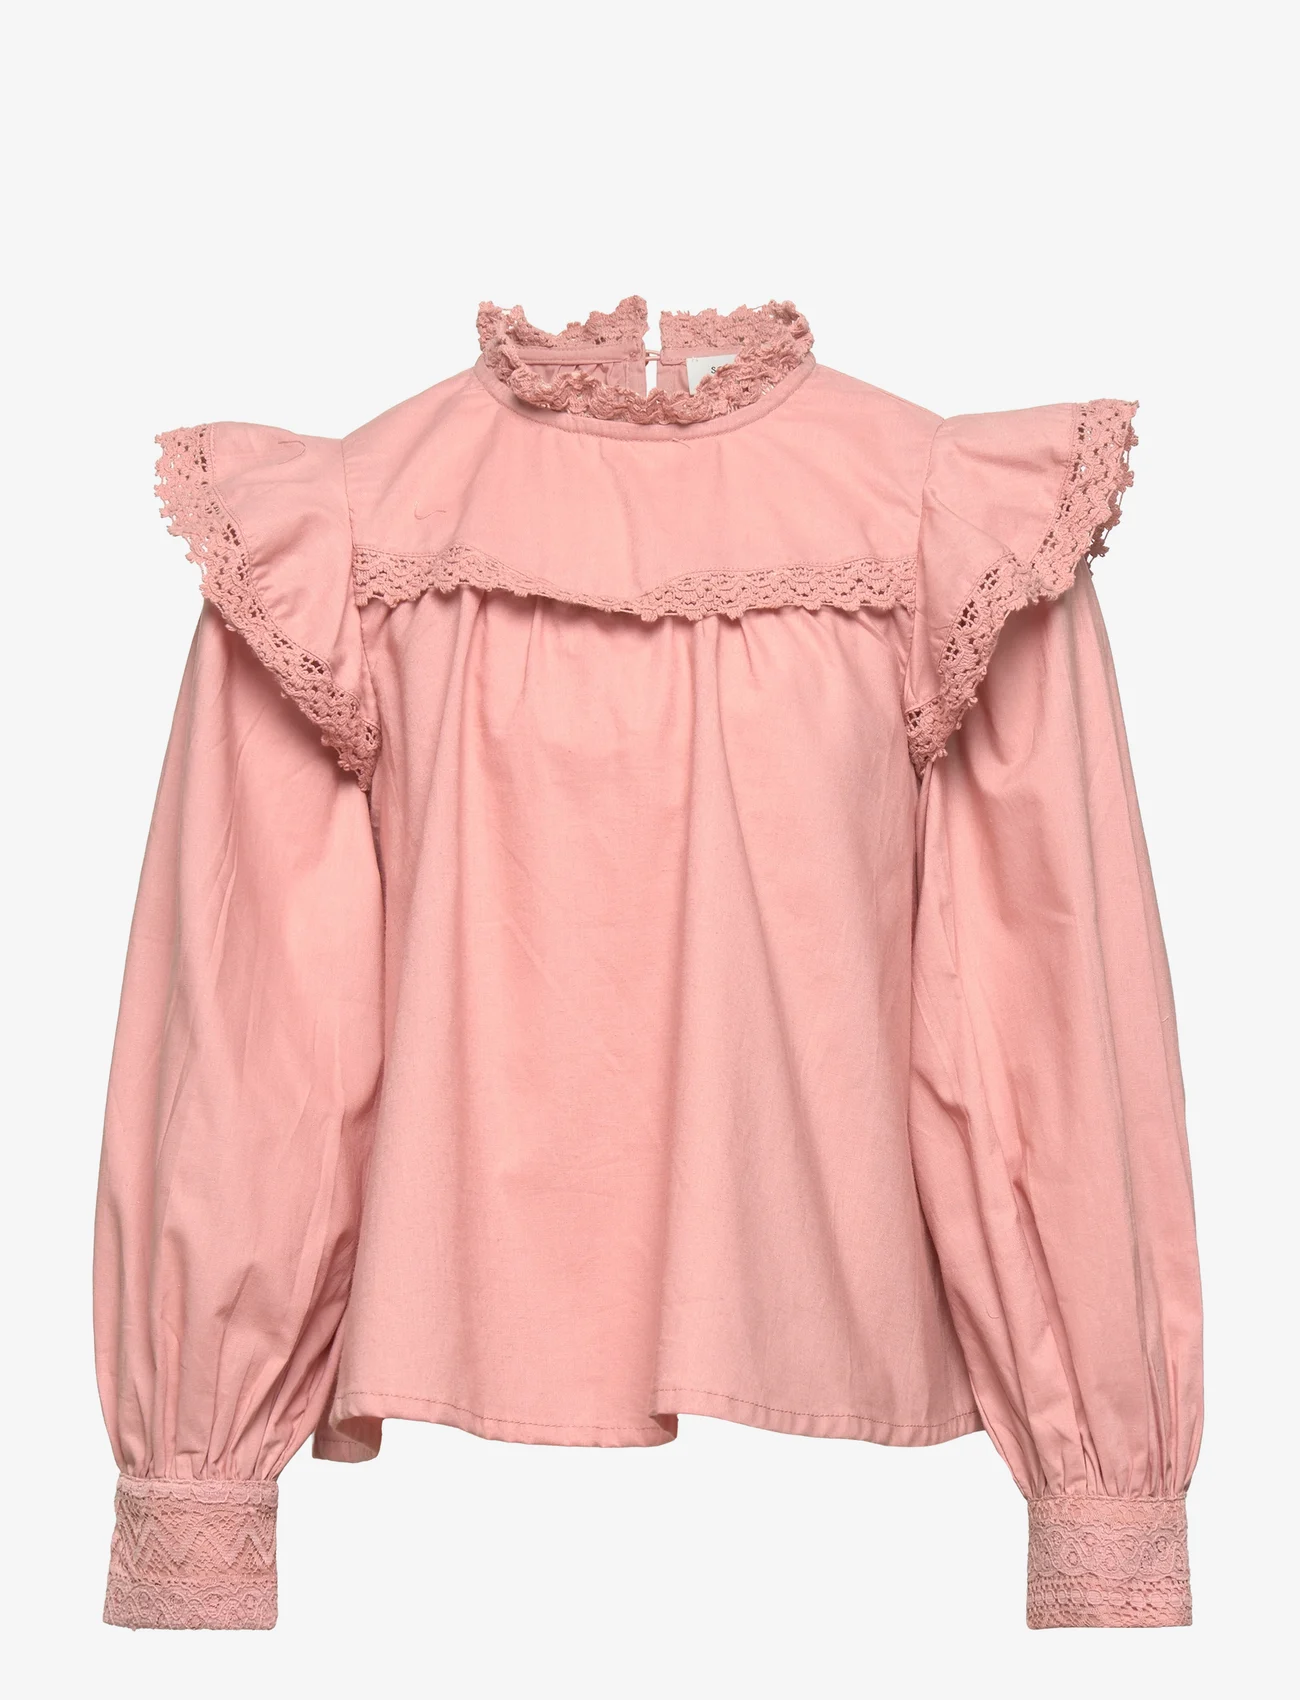 Sofie Schnoor Baby and Kids - Blouse - zomerkoopjes - misty rose - 0